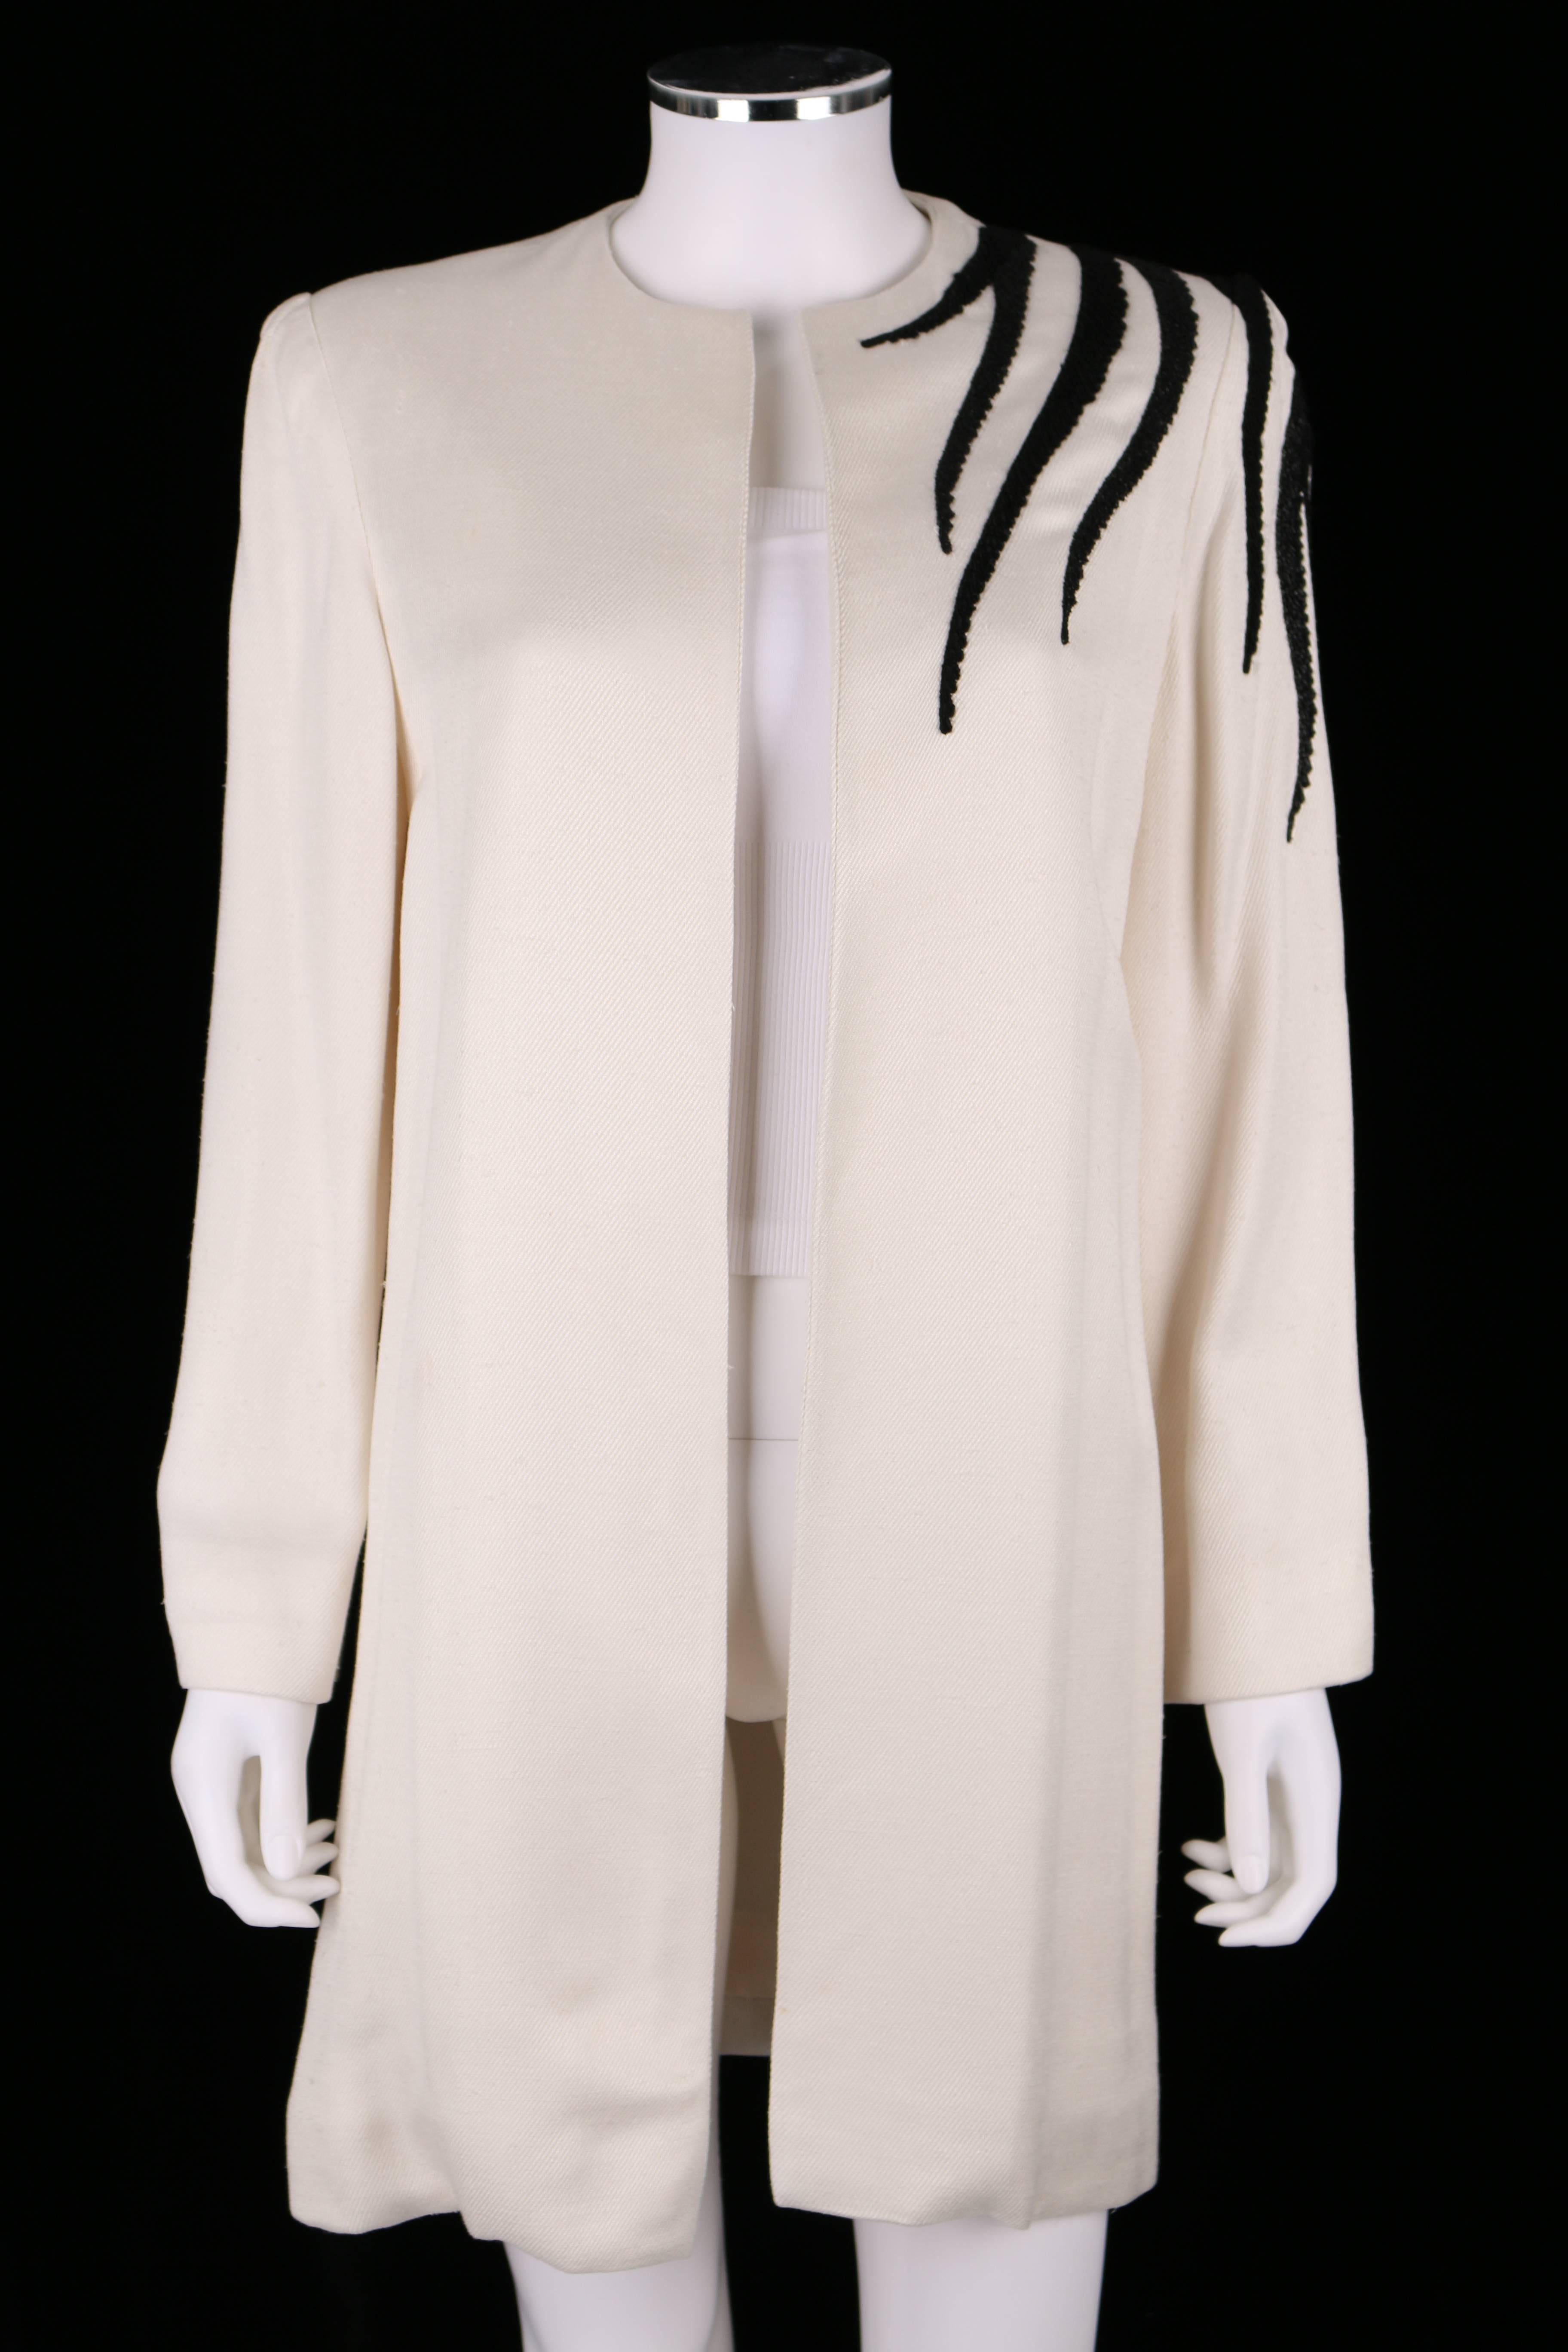 Vintage c.1980's Bob Mackie I. Magnin ivory silk twill long blazer jacket. Cord and beaded black roaster embellishment on back continuing onto left front shoulder. Long sleeve. Collarless. Open front. Padded shoulders. Fully lined. A tube top was